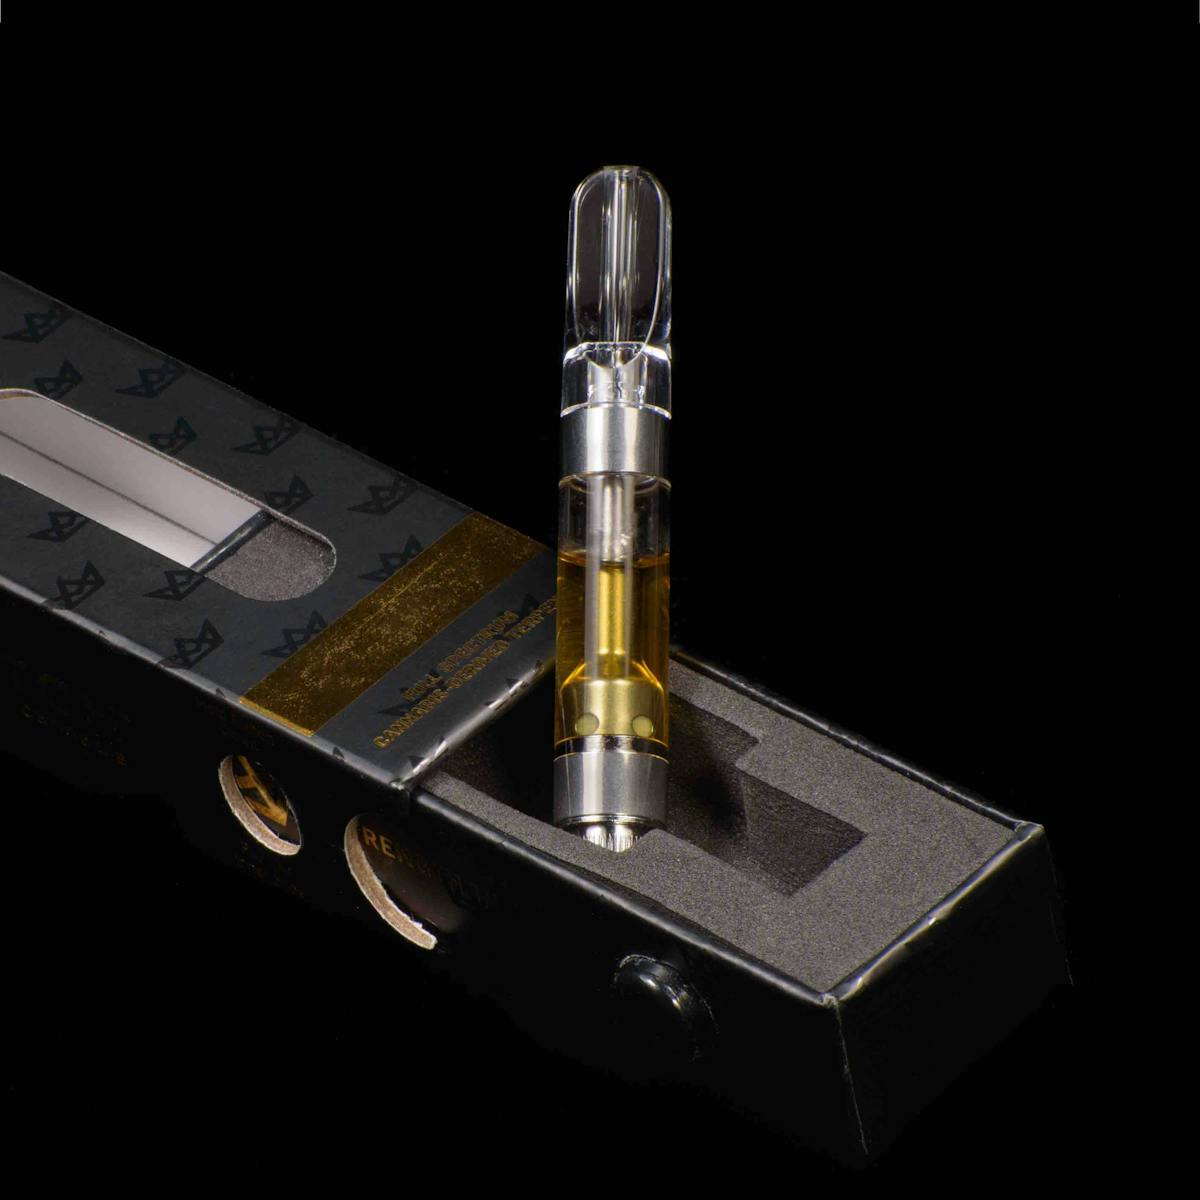 image of The Whip x Rose Gold R'ntz Live Resin Cartridge